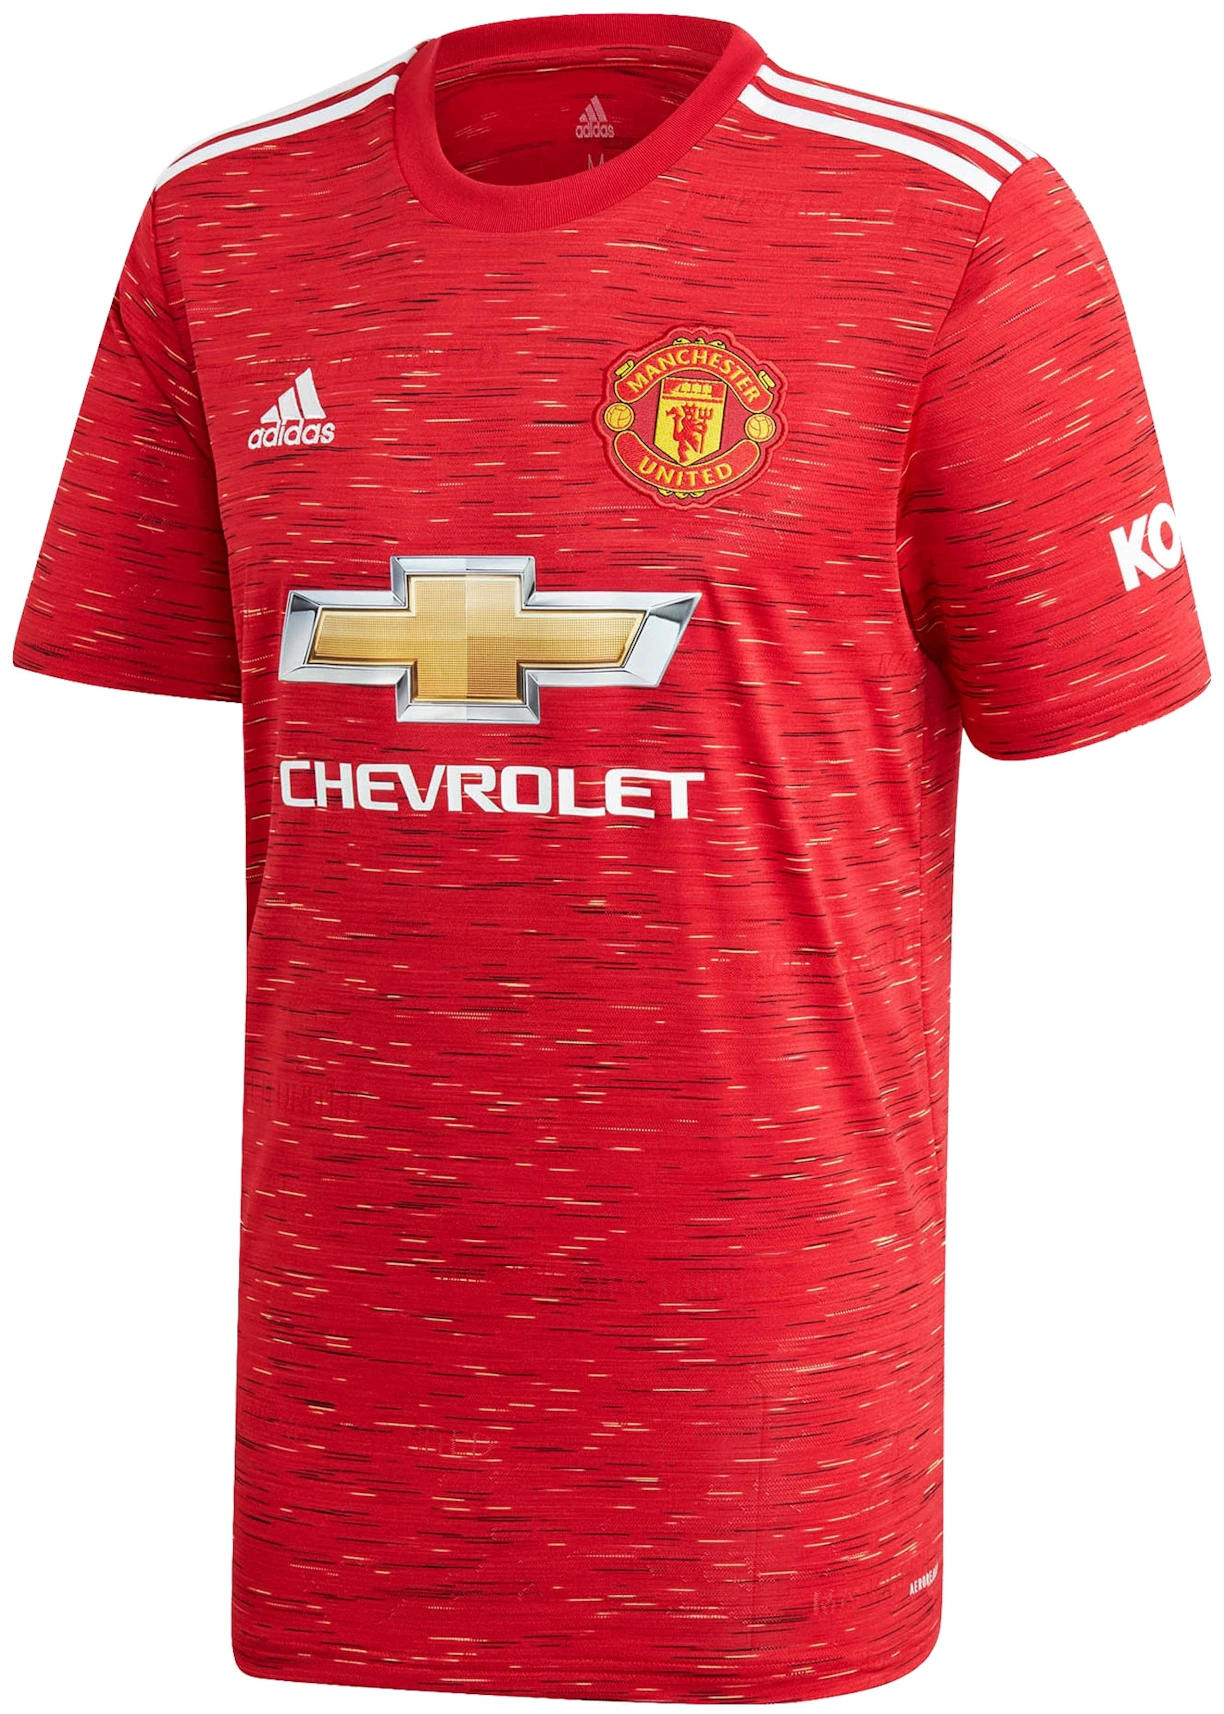 adidas Manchester United Shirt 2020-21 Jersey Red -